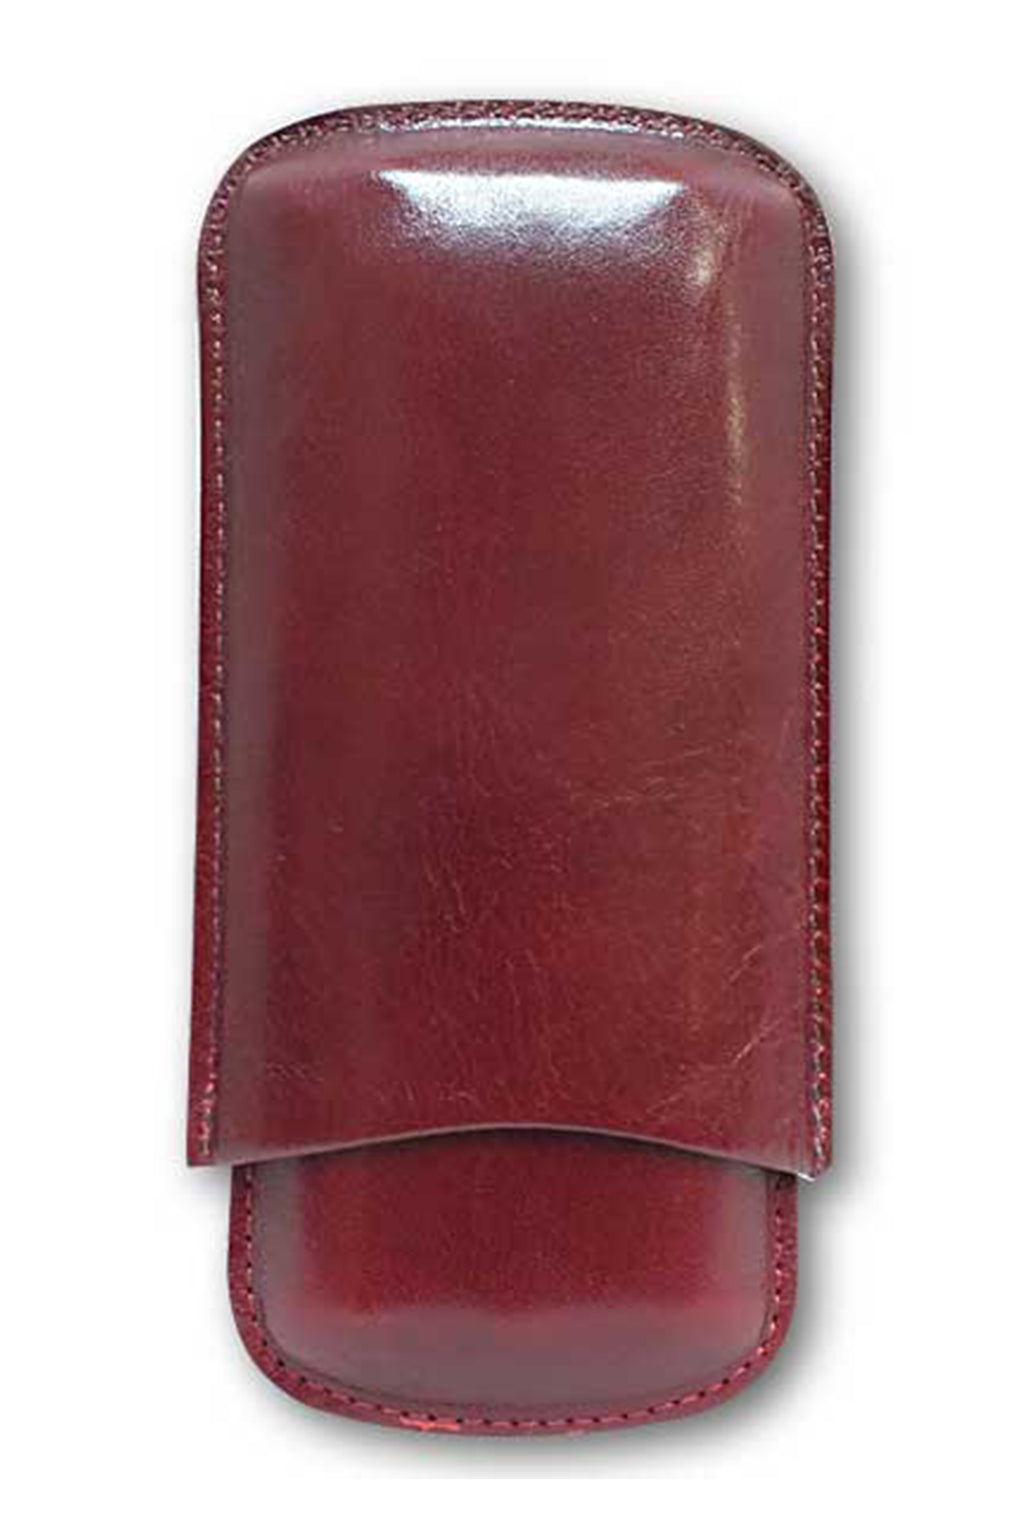 Genuine Leather Cigar Case | Made in USA